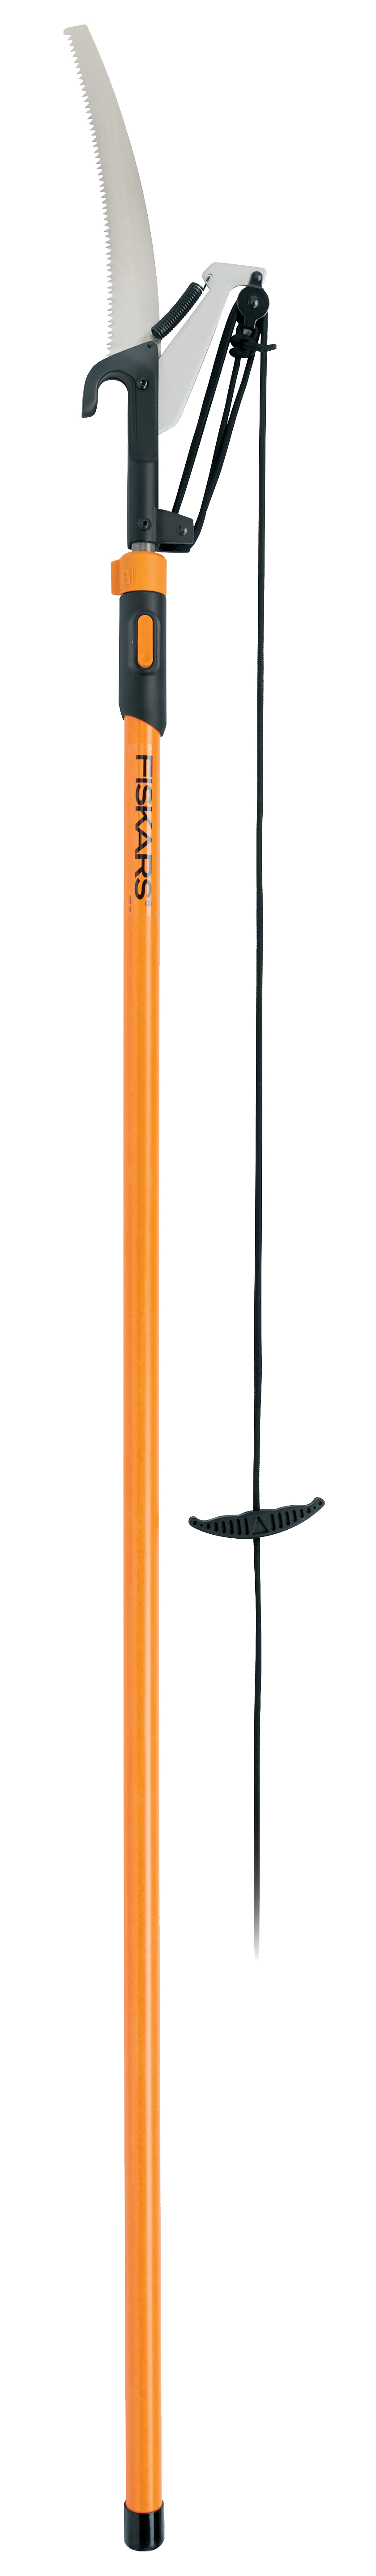 Fiskars Extendable 7-12ft Tree Pruner and Pole Saw, 12in Double Grind Saw - image 1 of 7